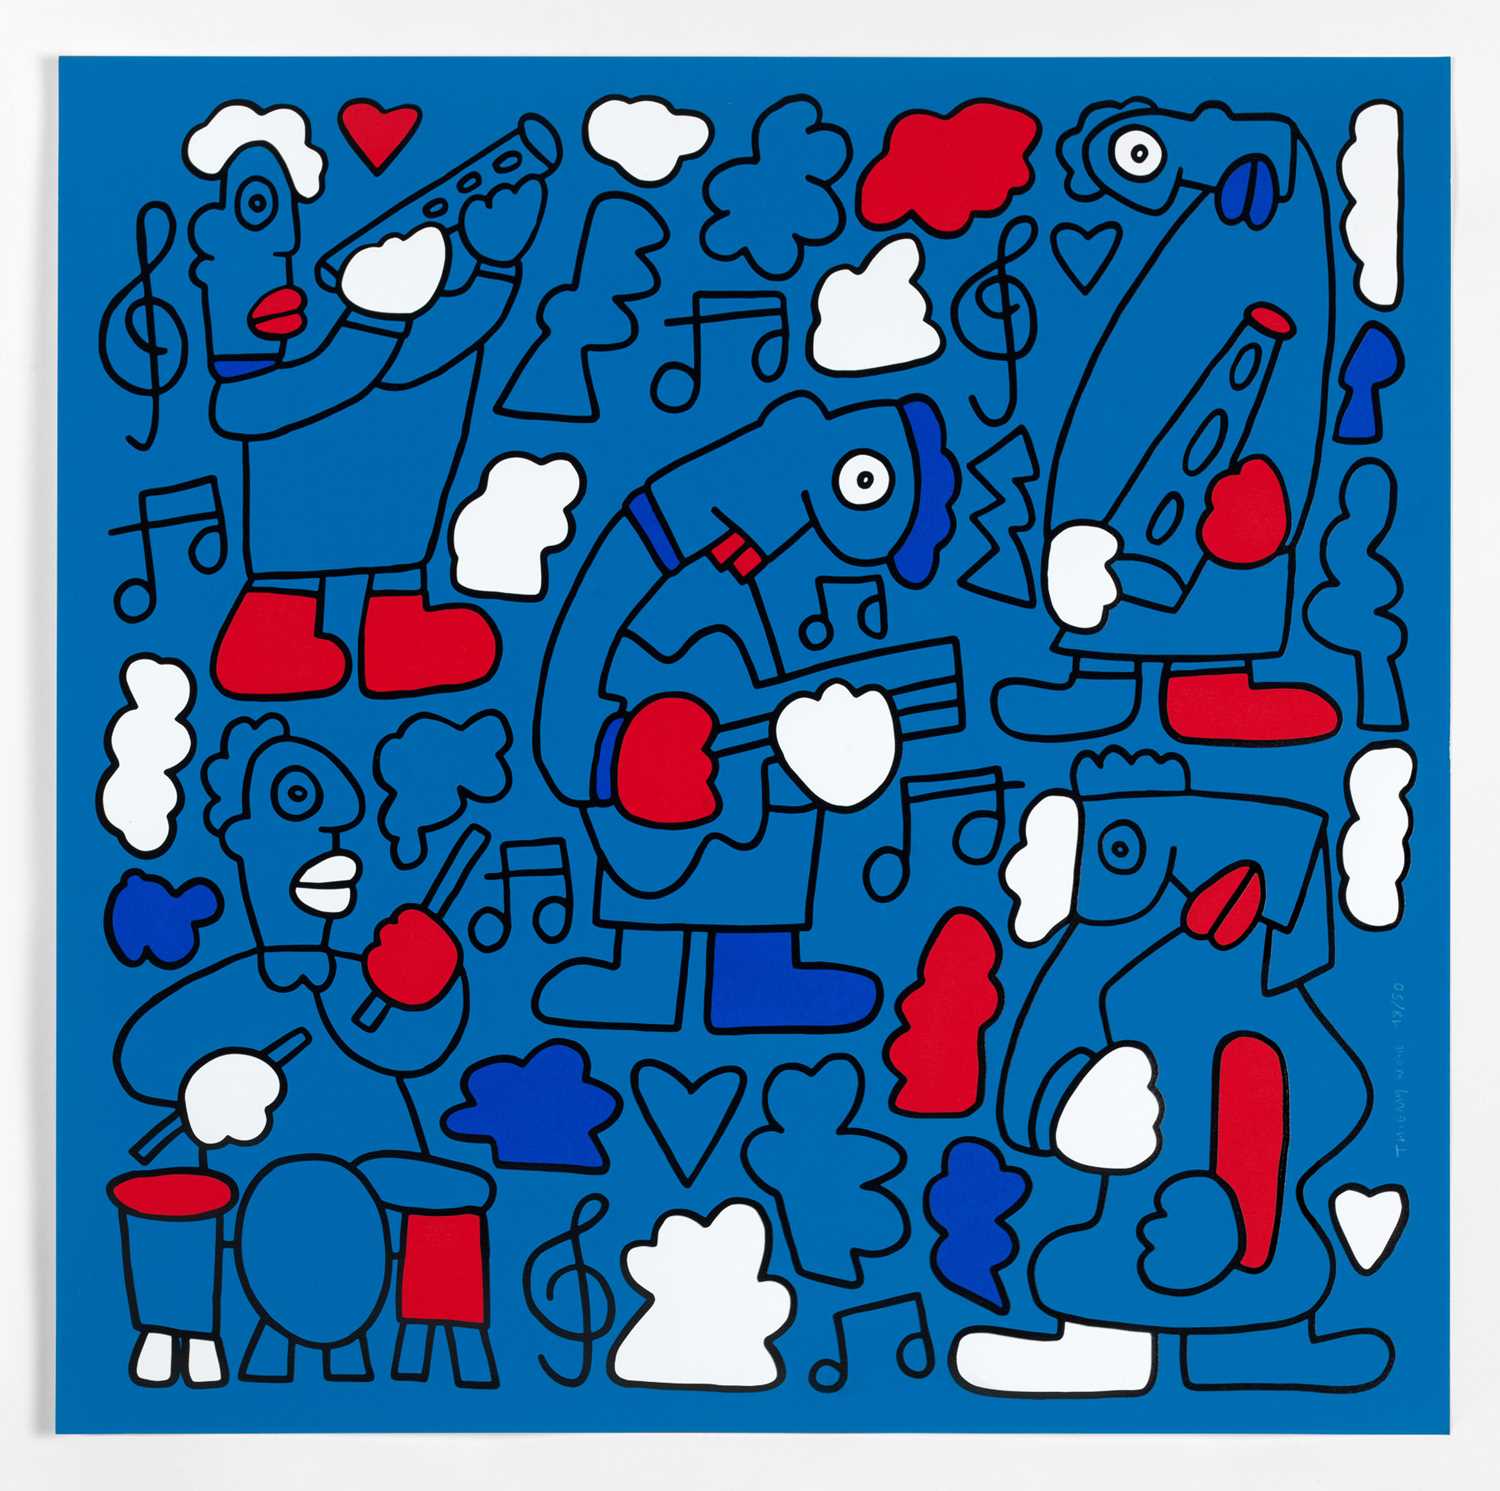 Lot 140 - Thierry Noir (French 1958-), 'The Show Must Go On', 2015